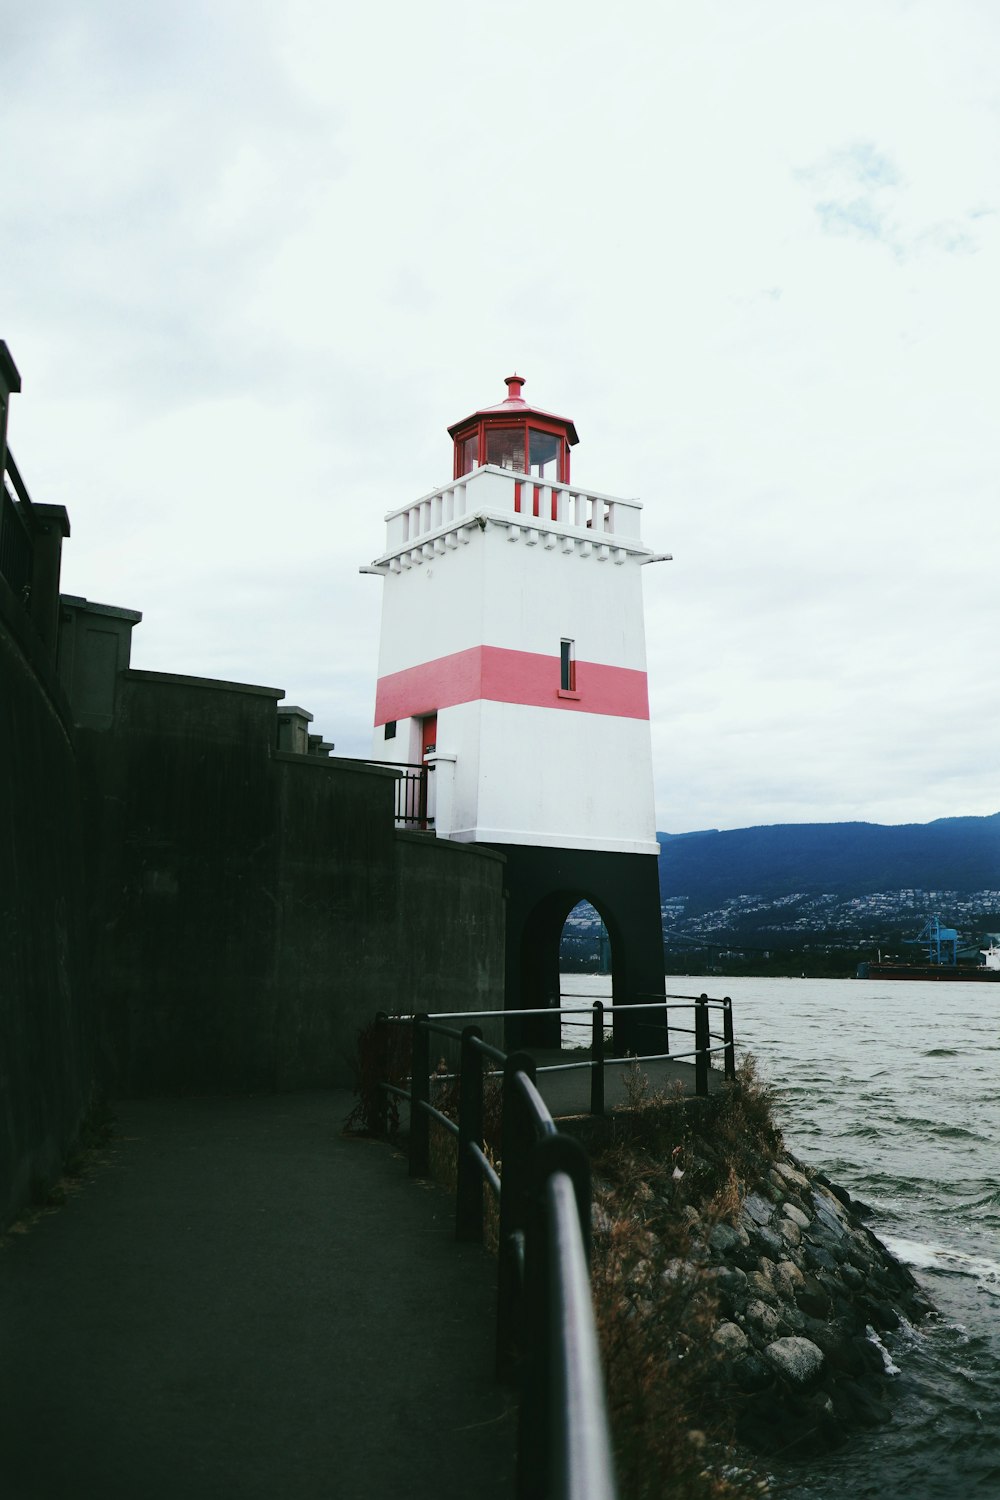 red and white concrete lighthouse near body of water during daytime